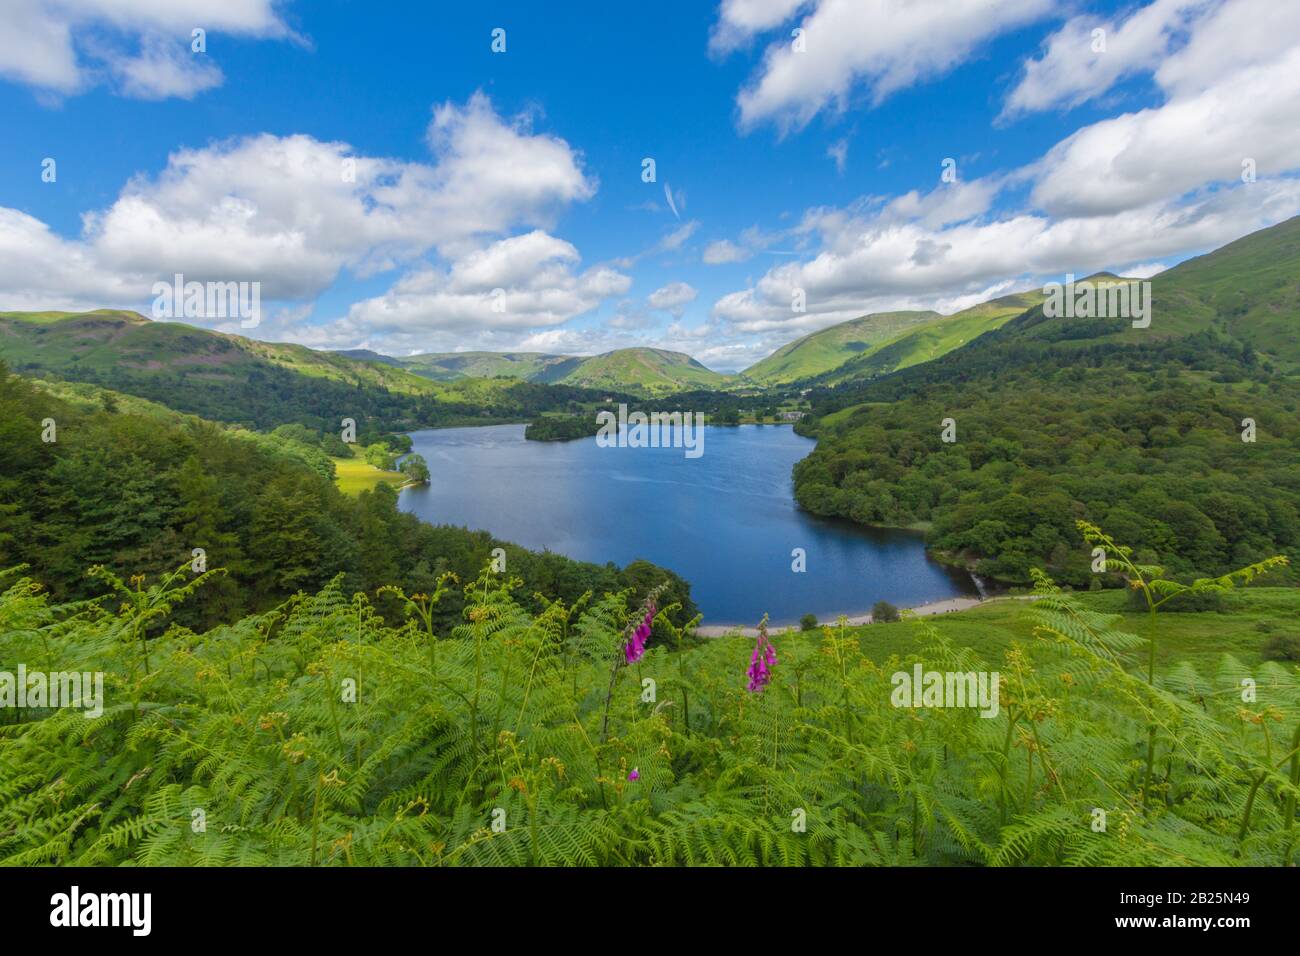 Sweeping view of Lake Grasmere in the Lake District, UK on a sunny spring day. Blue sky with puffy white clouds and foxglove flowers in the foreground Stock Photo